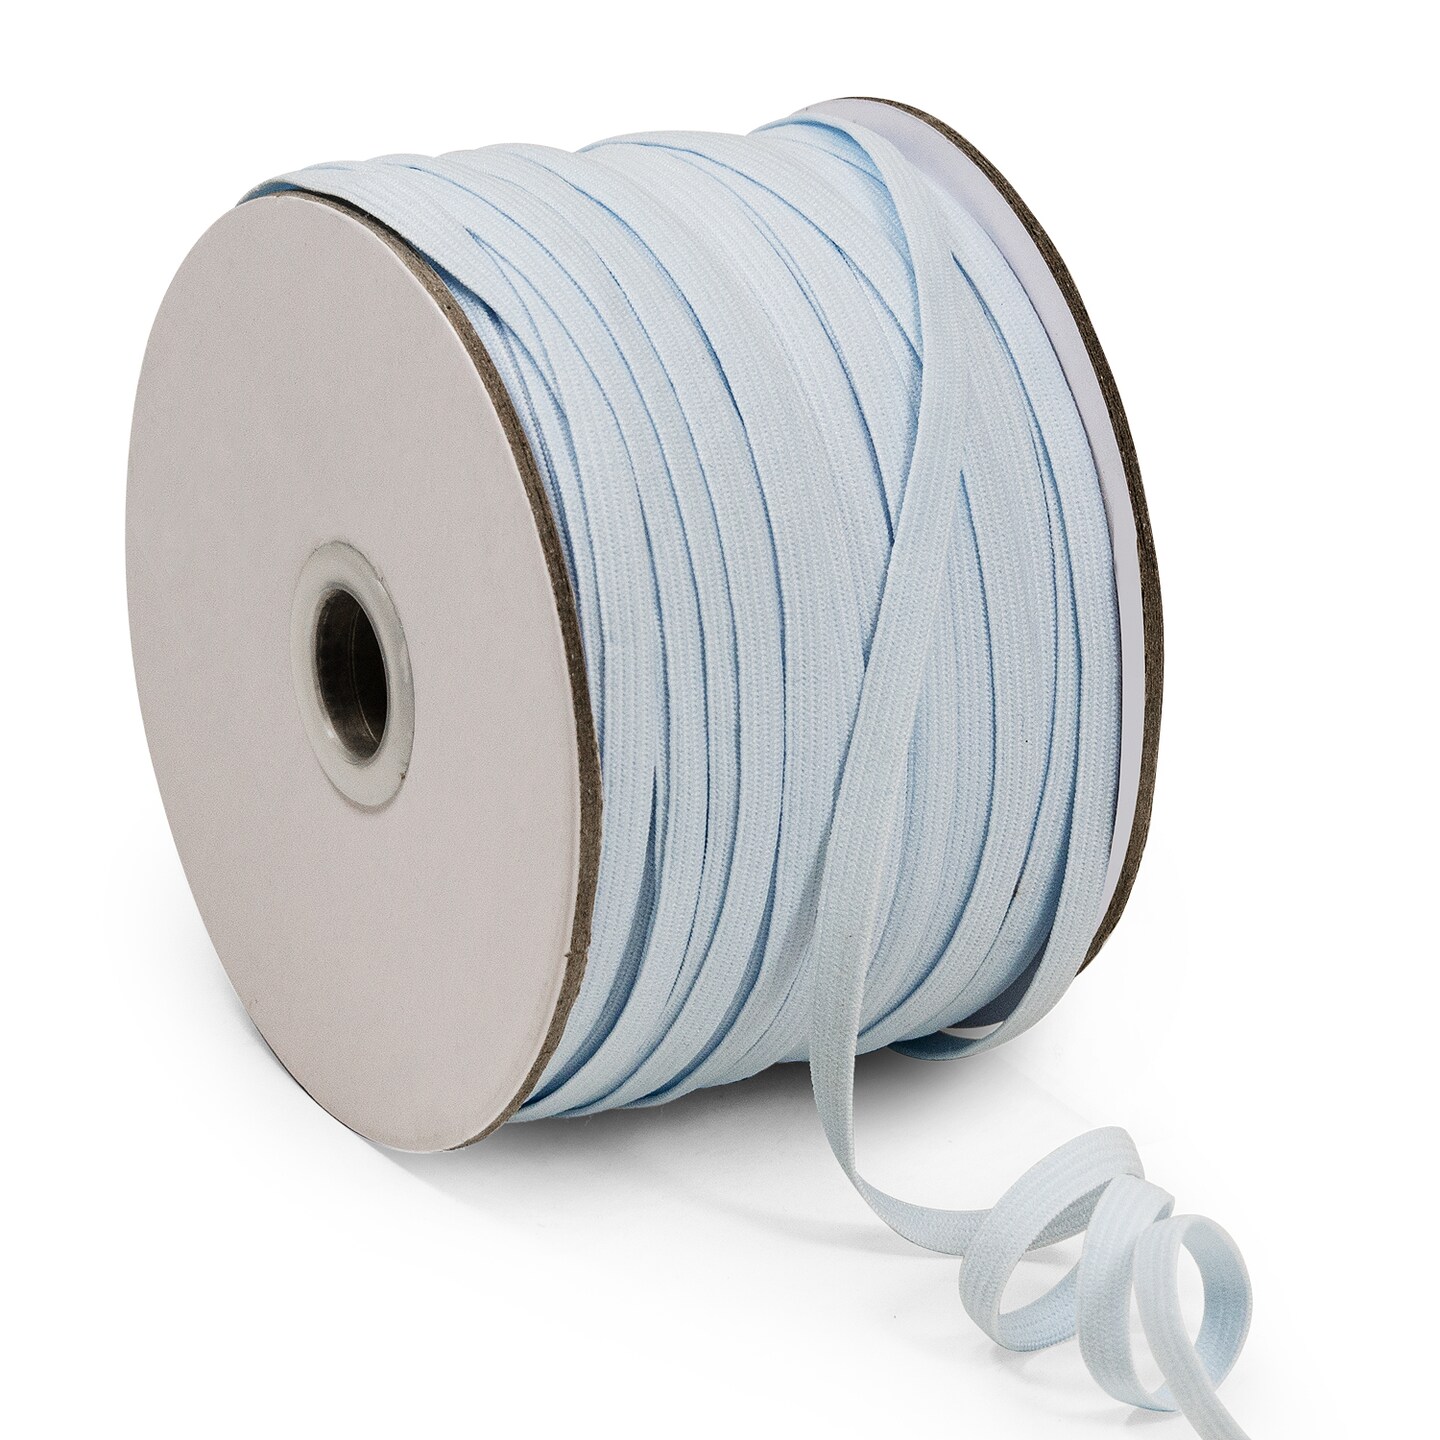 1/4 Elastic for sewing 100 Yards